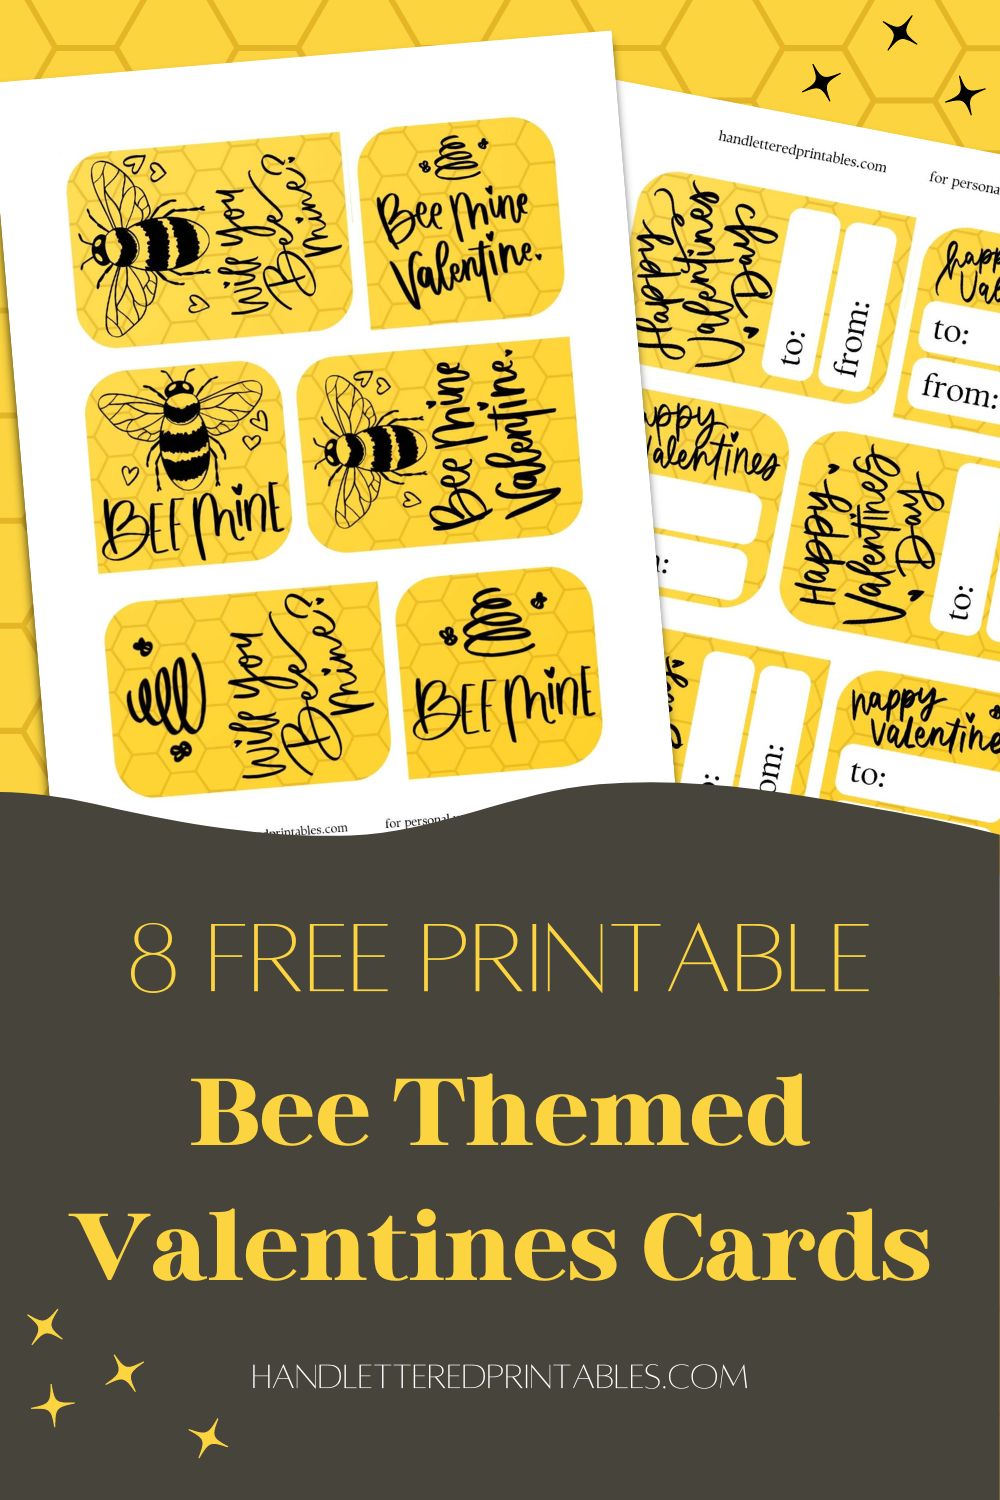 image of printed bee themed valentines cards on yellow background. valentines cards read: bee mine, will you bee mine, and bee mine valentine with illustrations of a bee and of a line art bee hive text overlay reads 8 free printable bee themed valentines cards